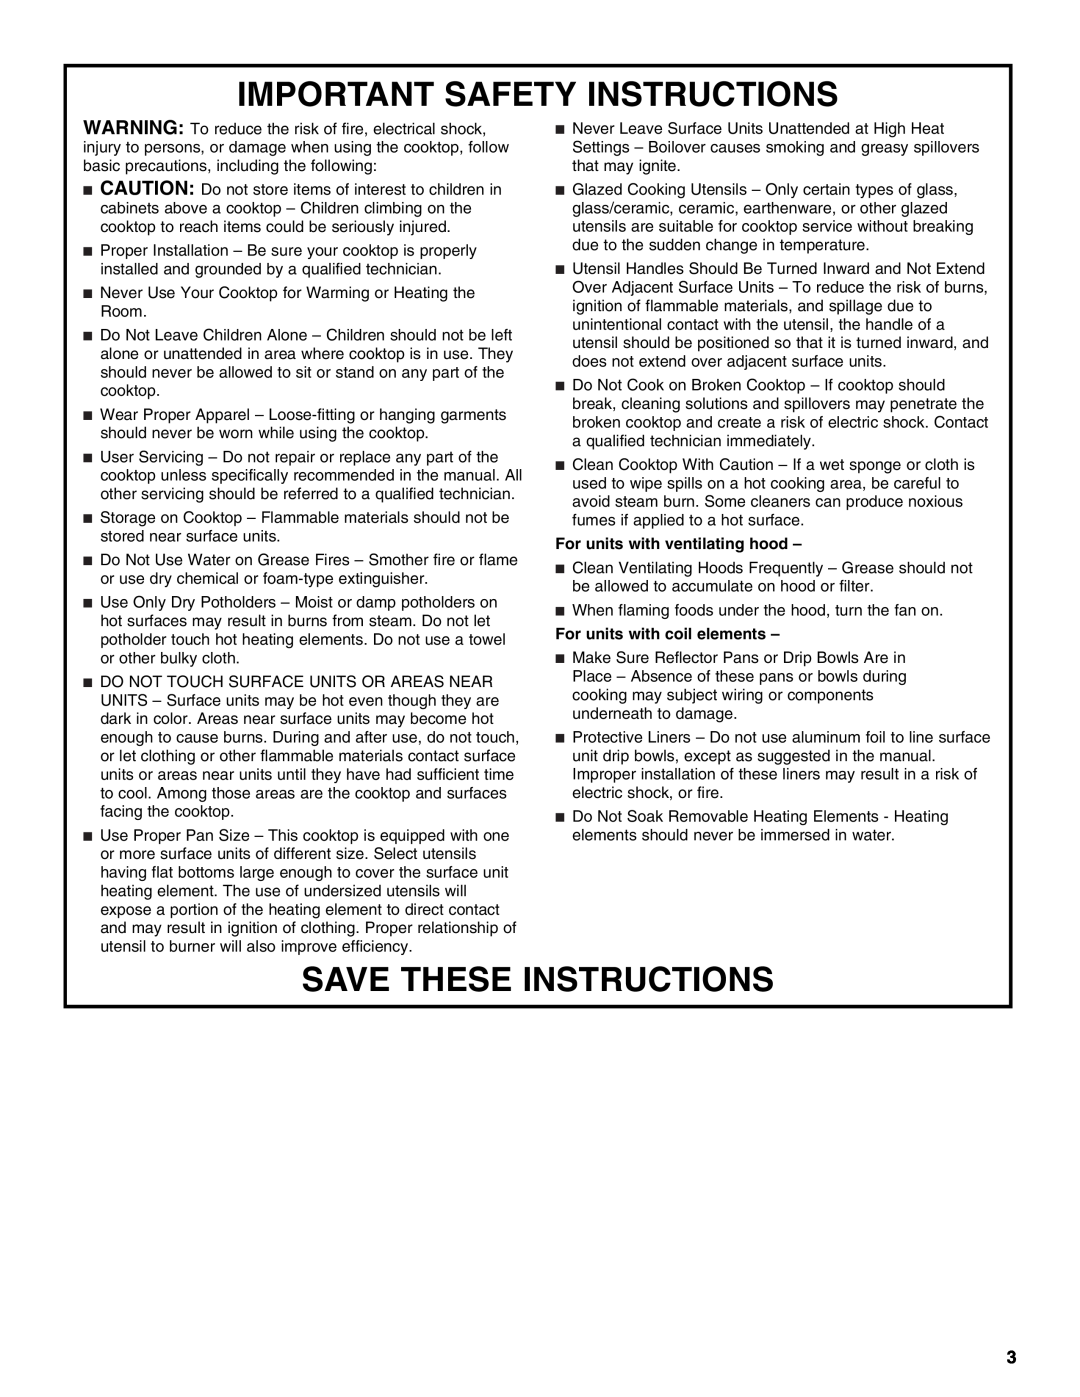 Whirlpool W10458809B manual Important Safety Instructions, Save These Instructions, For units with ventilating hood 